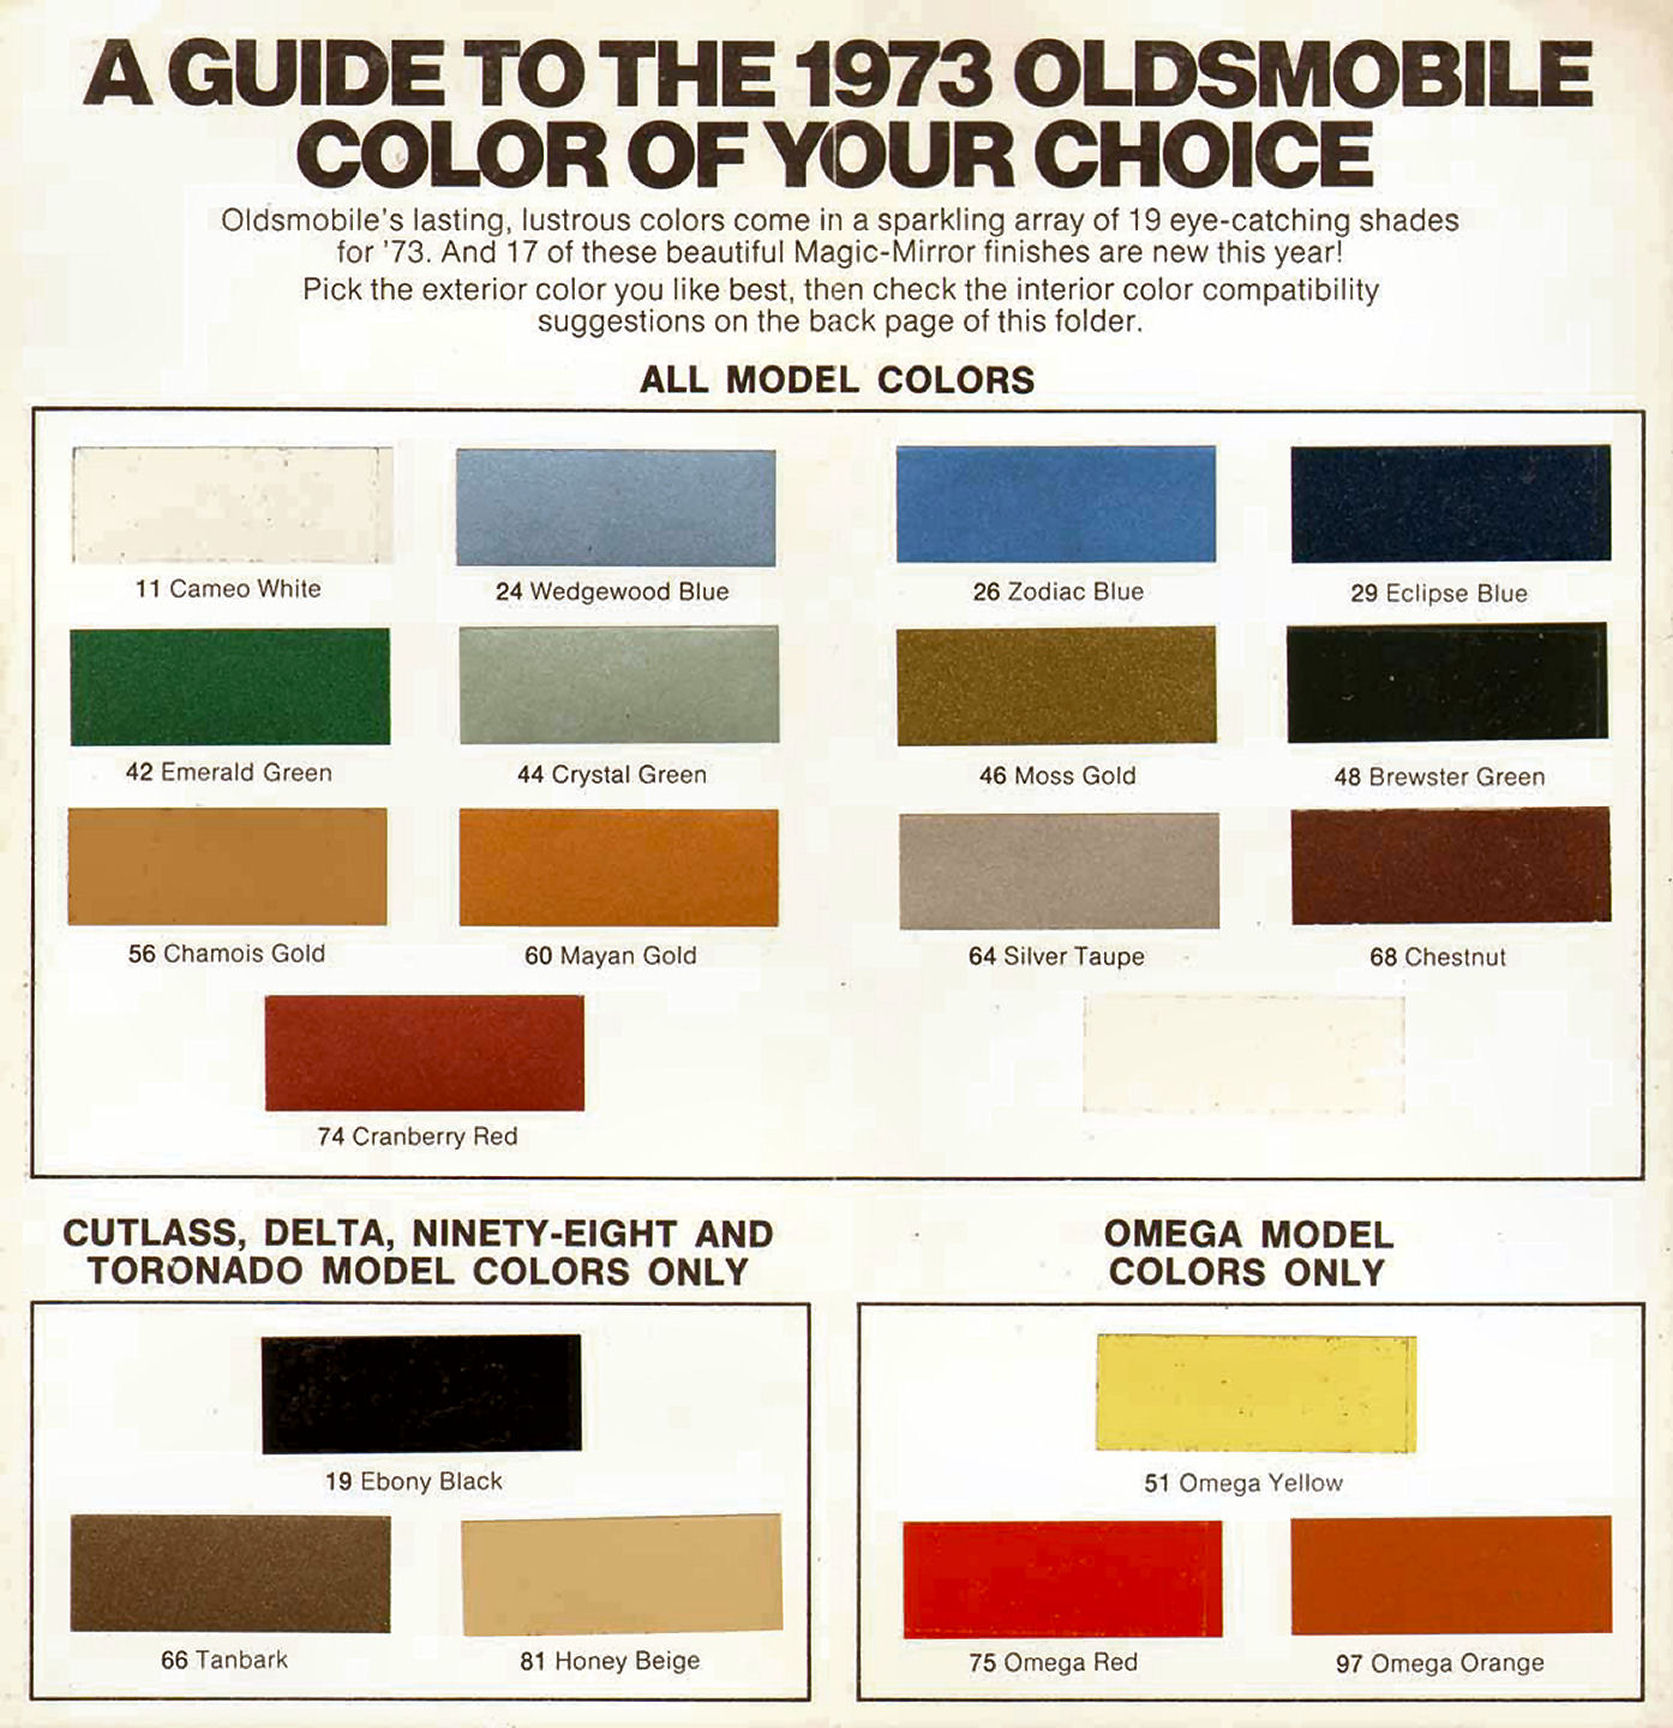 1973_Oldsmobile_Exterior_Colors_Guide-02-03